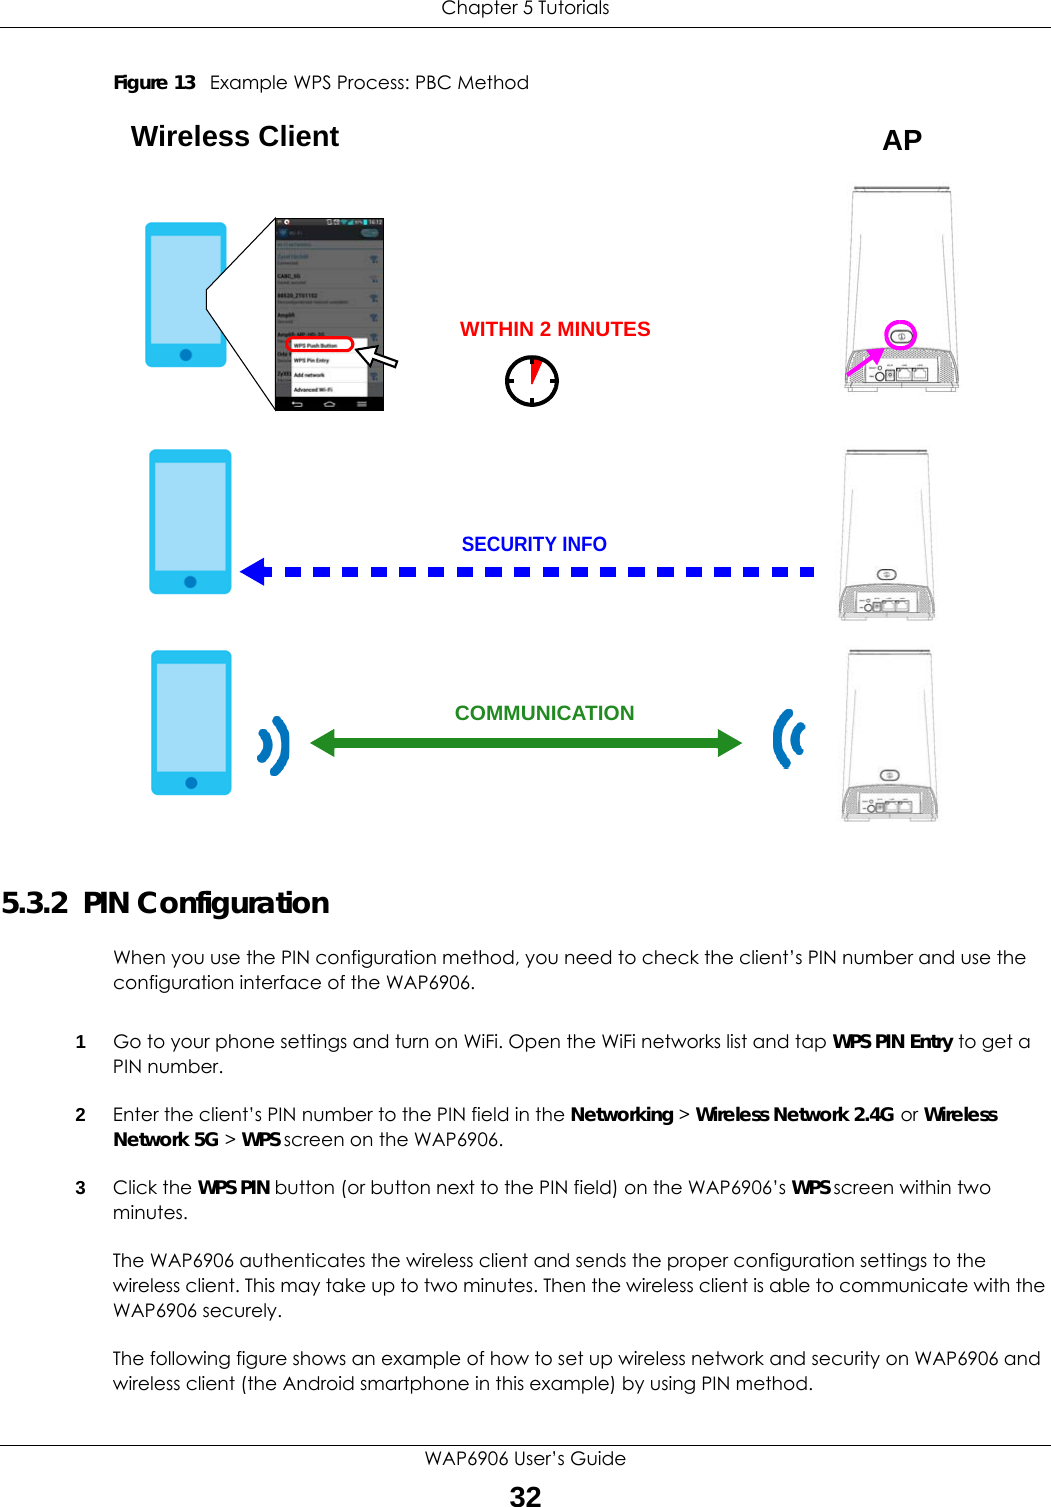 Chapter 5 TutorialsWAP6906 User’s Guide32Figure 13   Example WPS Process: PBC Method5.3.2  PIN ConfigurationWhen you use the PIN configuration method, you need to check the client’s PIN number and use the configuration interface of the WAP6906.1Go to your phone settings and turn on WiFi. Open the WiFi networks list and tap WPS PIN Entry to get a PIN number.2Enter the client’s PIN number to the PIN field in the Networking &gt; Wireless Network 2.4G or Wireless Network 5G &gt; WPS screen on the WAP6906.3Click the WPS PIN button (or button next to the PIN field) on the WAP6906’s WPS screen within two minutes.The WAP6906 authenticates the wireless client and sends the proper configuration settings to the wireless client. This may take up to two minutes. Then the wireless client is able to communicate with the WAP6906 securely. The following figure shows an example of how to set up wireless network and security on WAP6906 and wireless client (the Android smartphone in this example) by using PIN method. Wireless Client    SECURITY INFOCOMMUNICATIONWITHIN 2 MINUTESAP